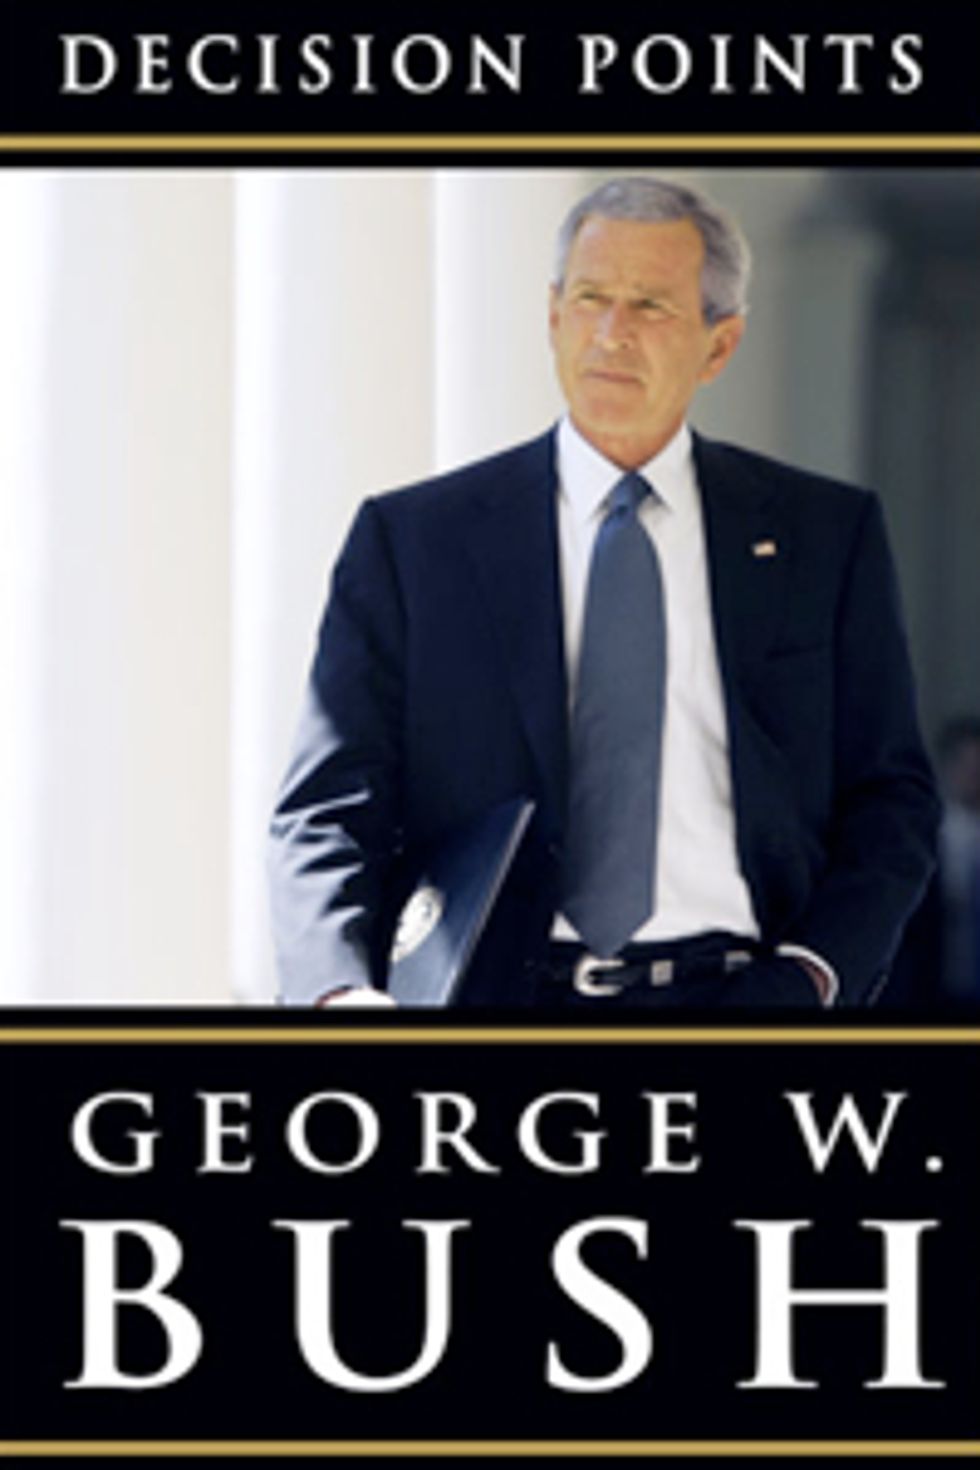 Buy Your Copy Of Mean Old George W. Bush's DECISION POINTS Now